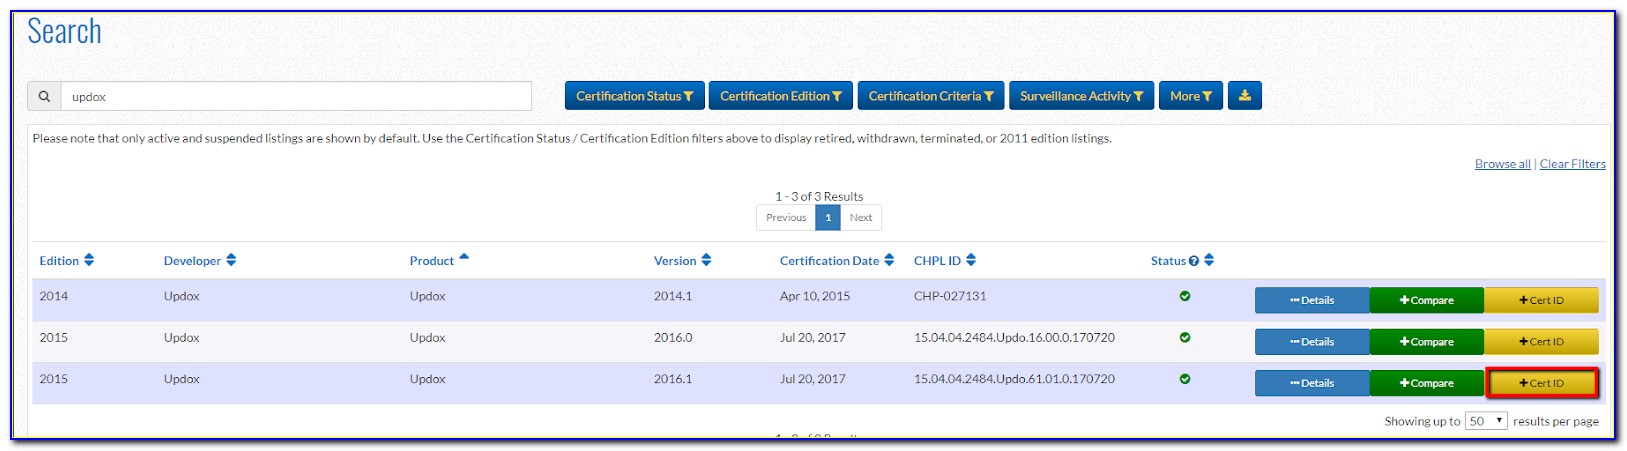 Cms Ehr Certification Id Number